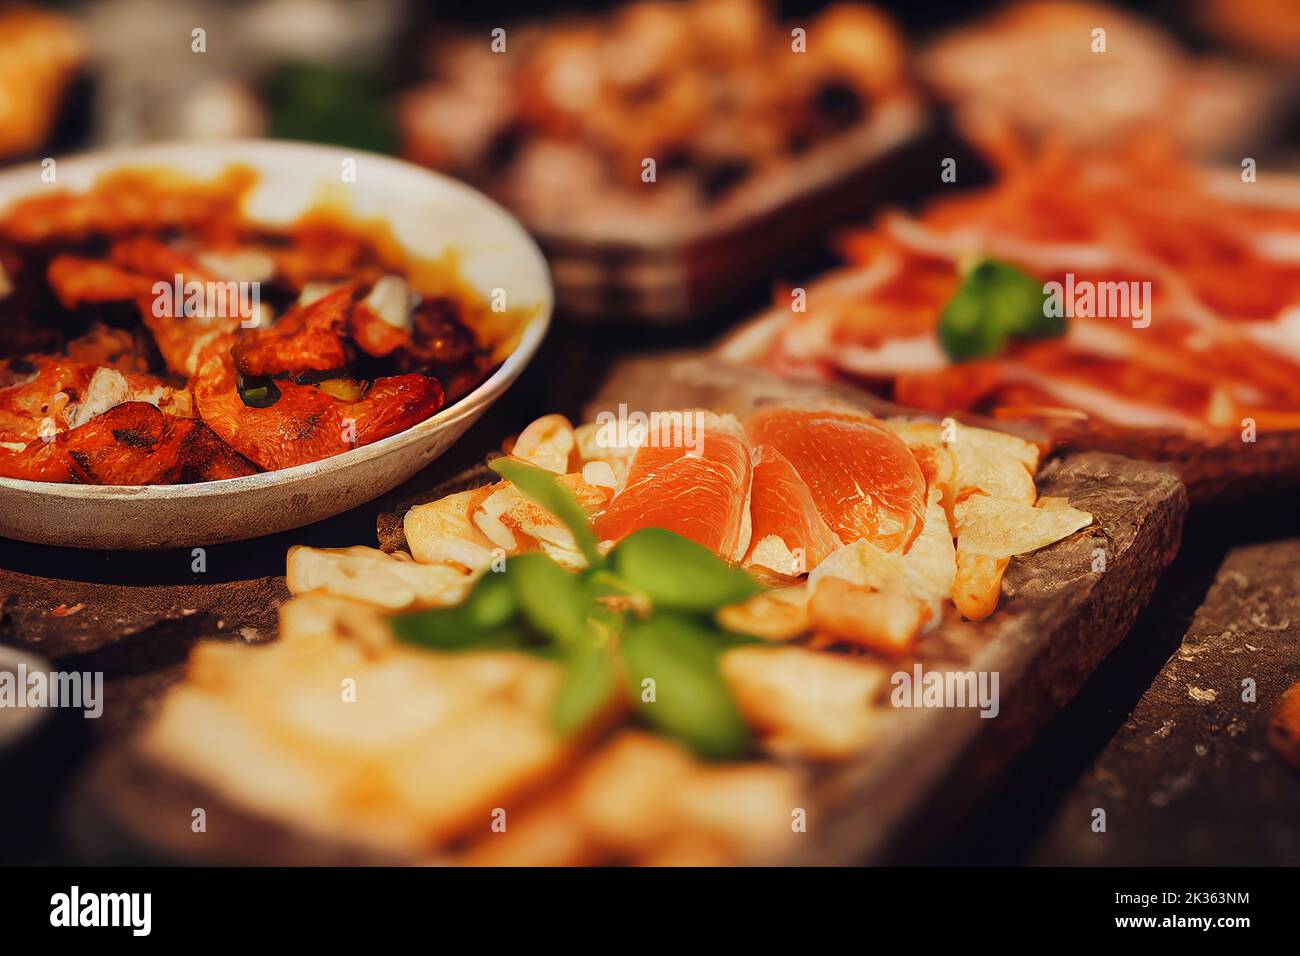 Table with Italian food, charcuterie board with cured meats prosciutto and cheeses, moody lighting, selective focus, food photography and illustration Stock Photo